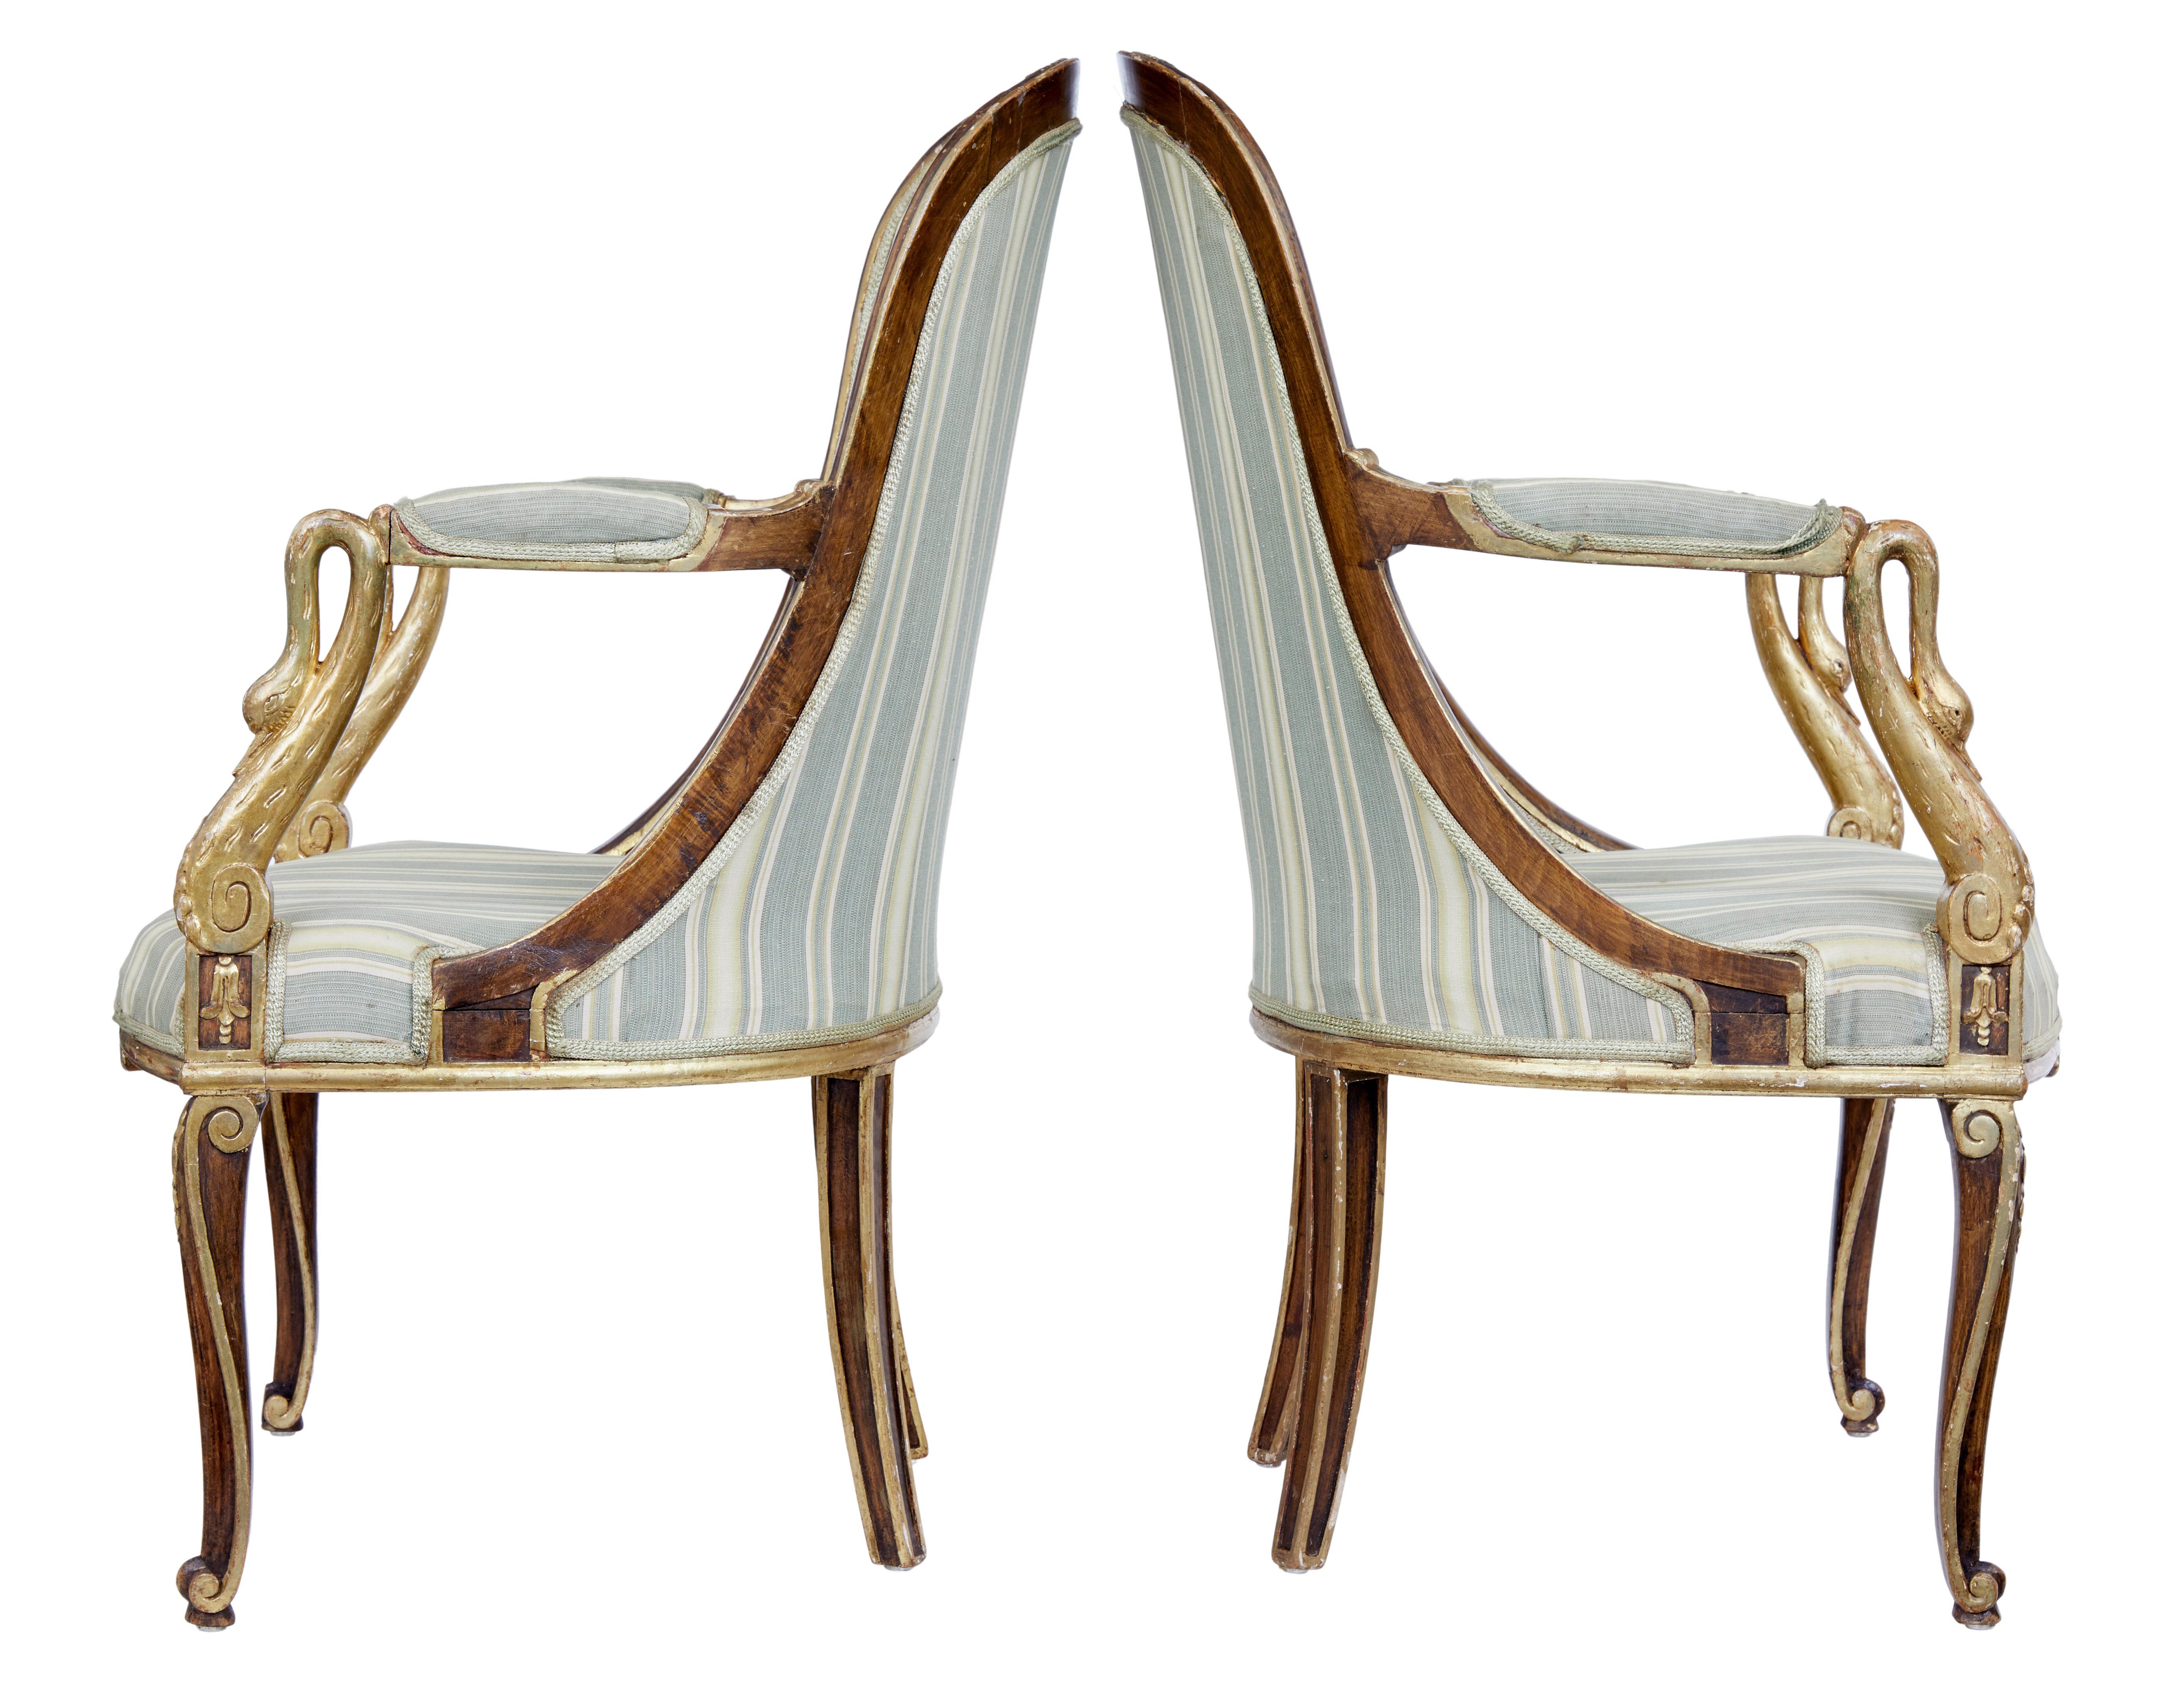 Pair of mid-19th century French walnut and gilt armchairs, circa 1840.

Fine and rare pair of French walnut armchairs. Shaped backs which leads down the arms which are supported by carved gilt swan necks. Further gilt and scroll work to the